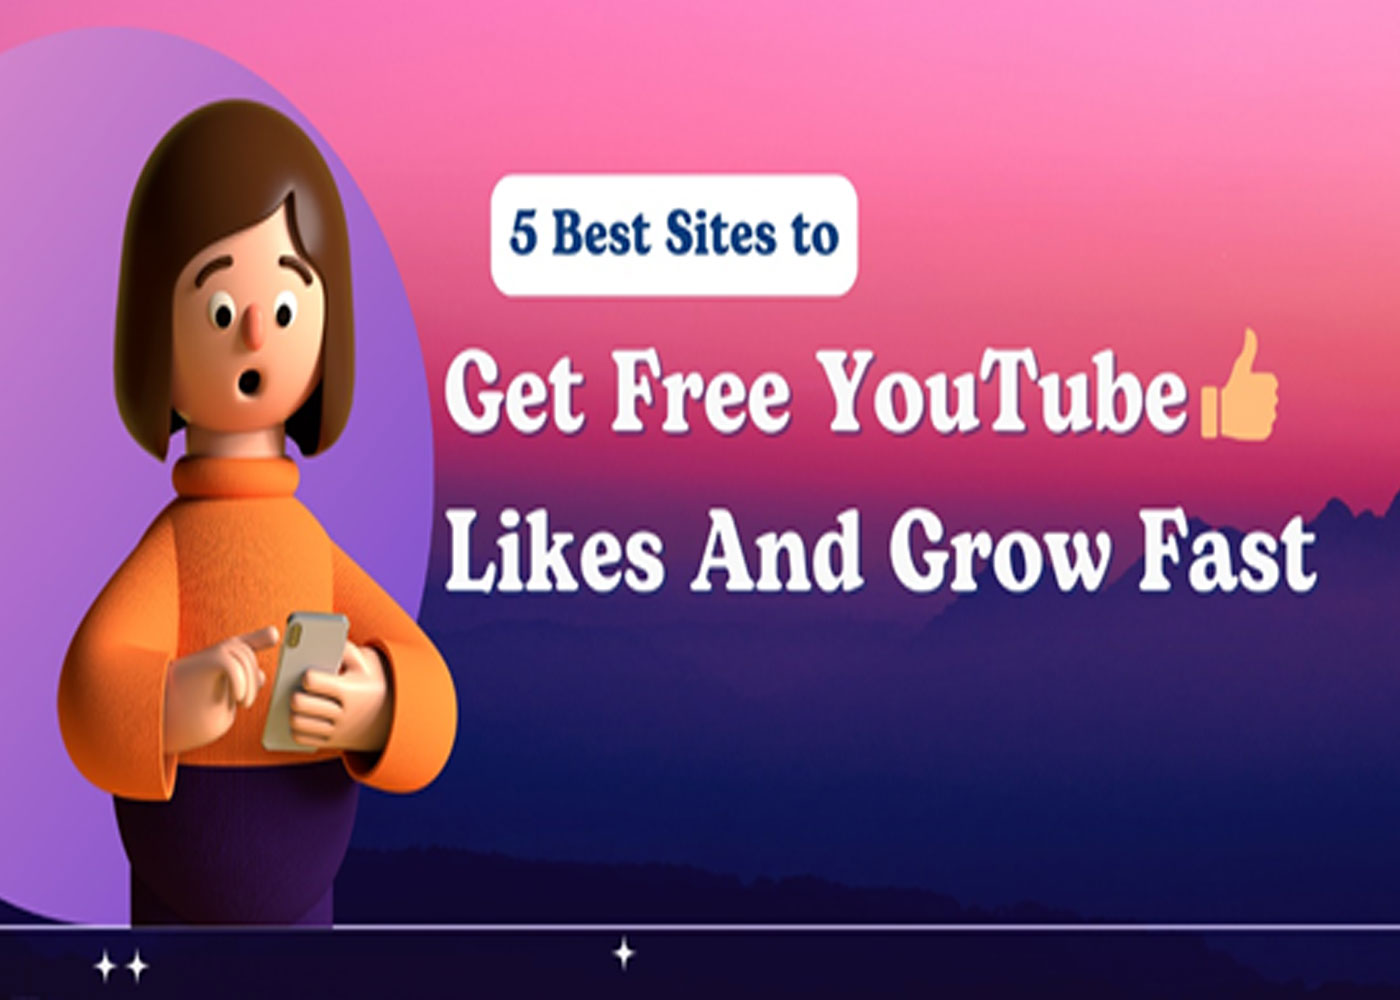 5 Best Sites to Get Free YouTube Likes and Grow Fast